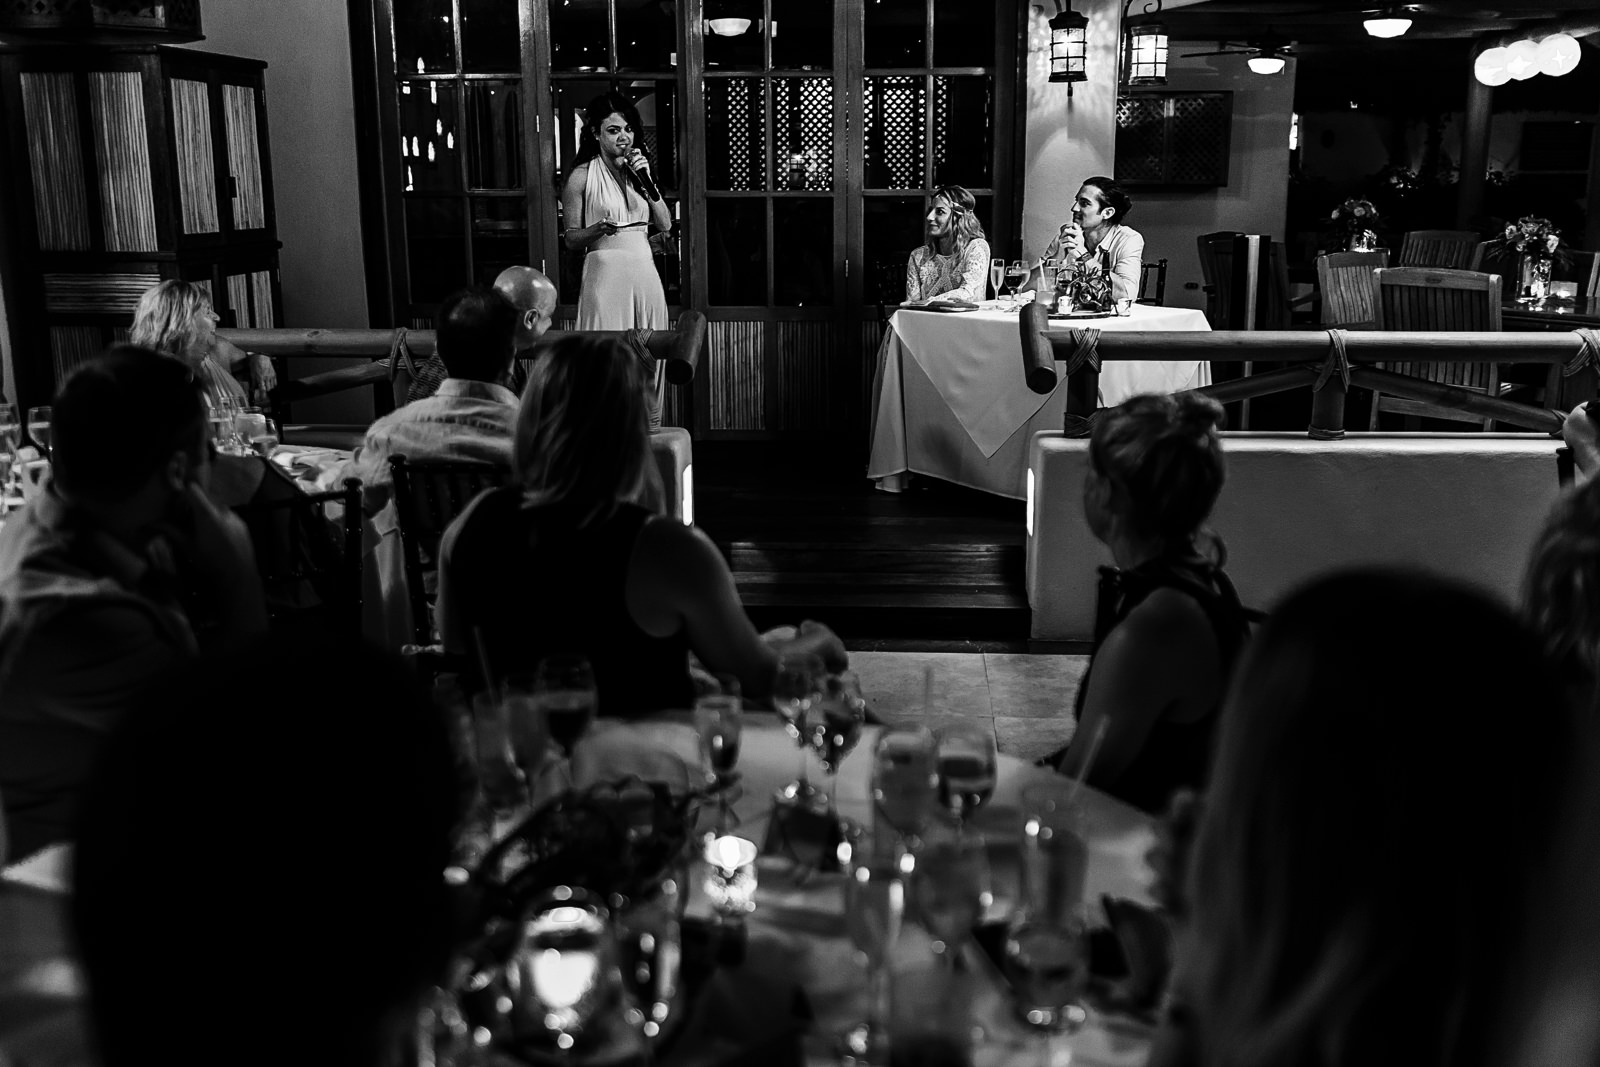 Maid of honor giving a speech to the groom and bride on their wedding reception